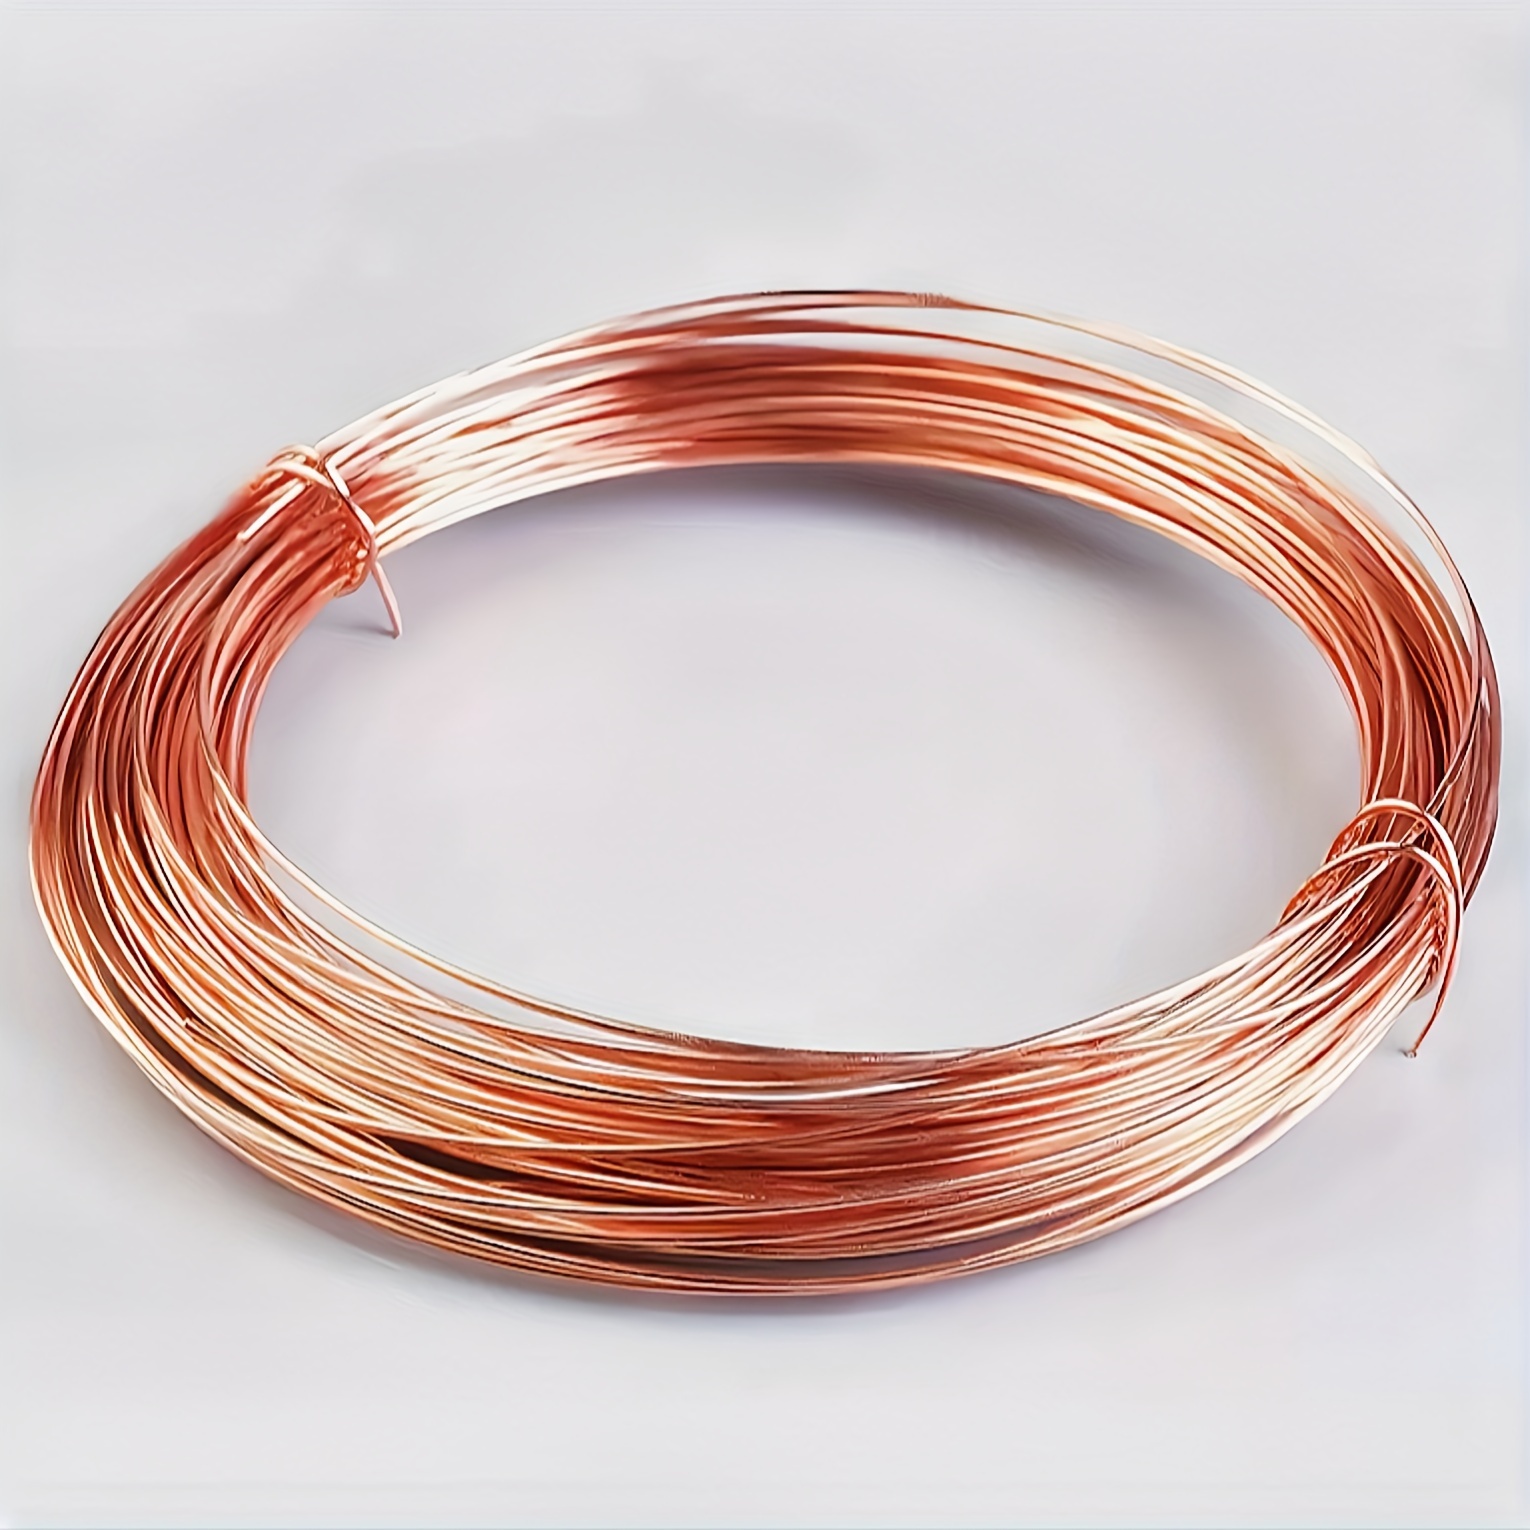 

10m Length Copper Wire, 0.3mm Thickness, Flexible & Durable For Diy Jewelry Making, Crafts, With Easy Cutting Design